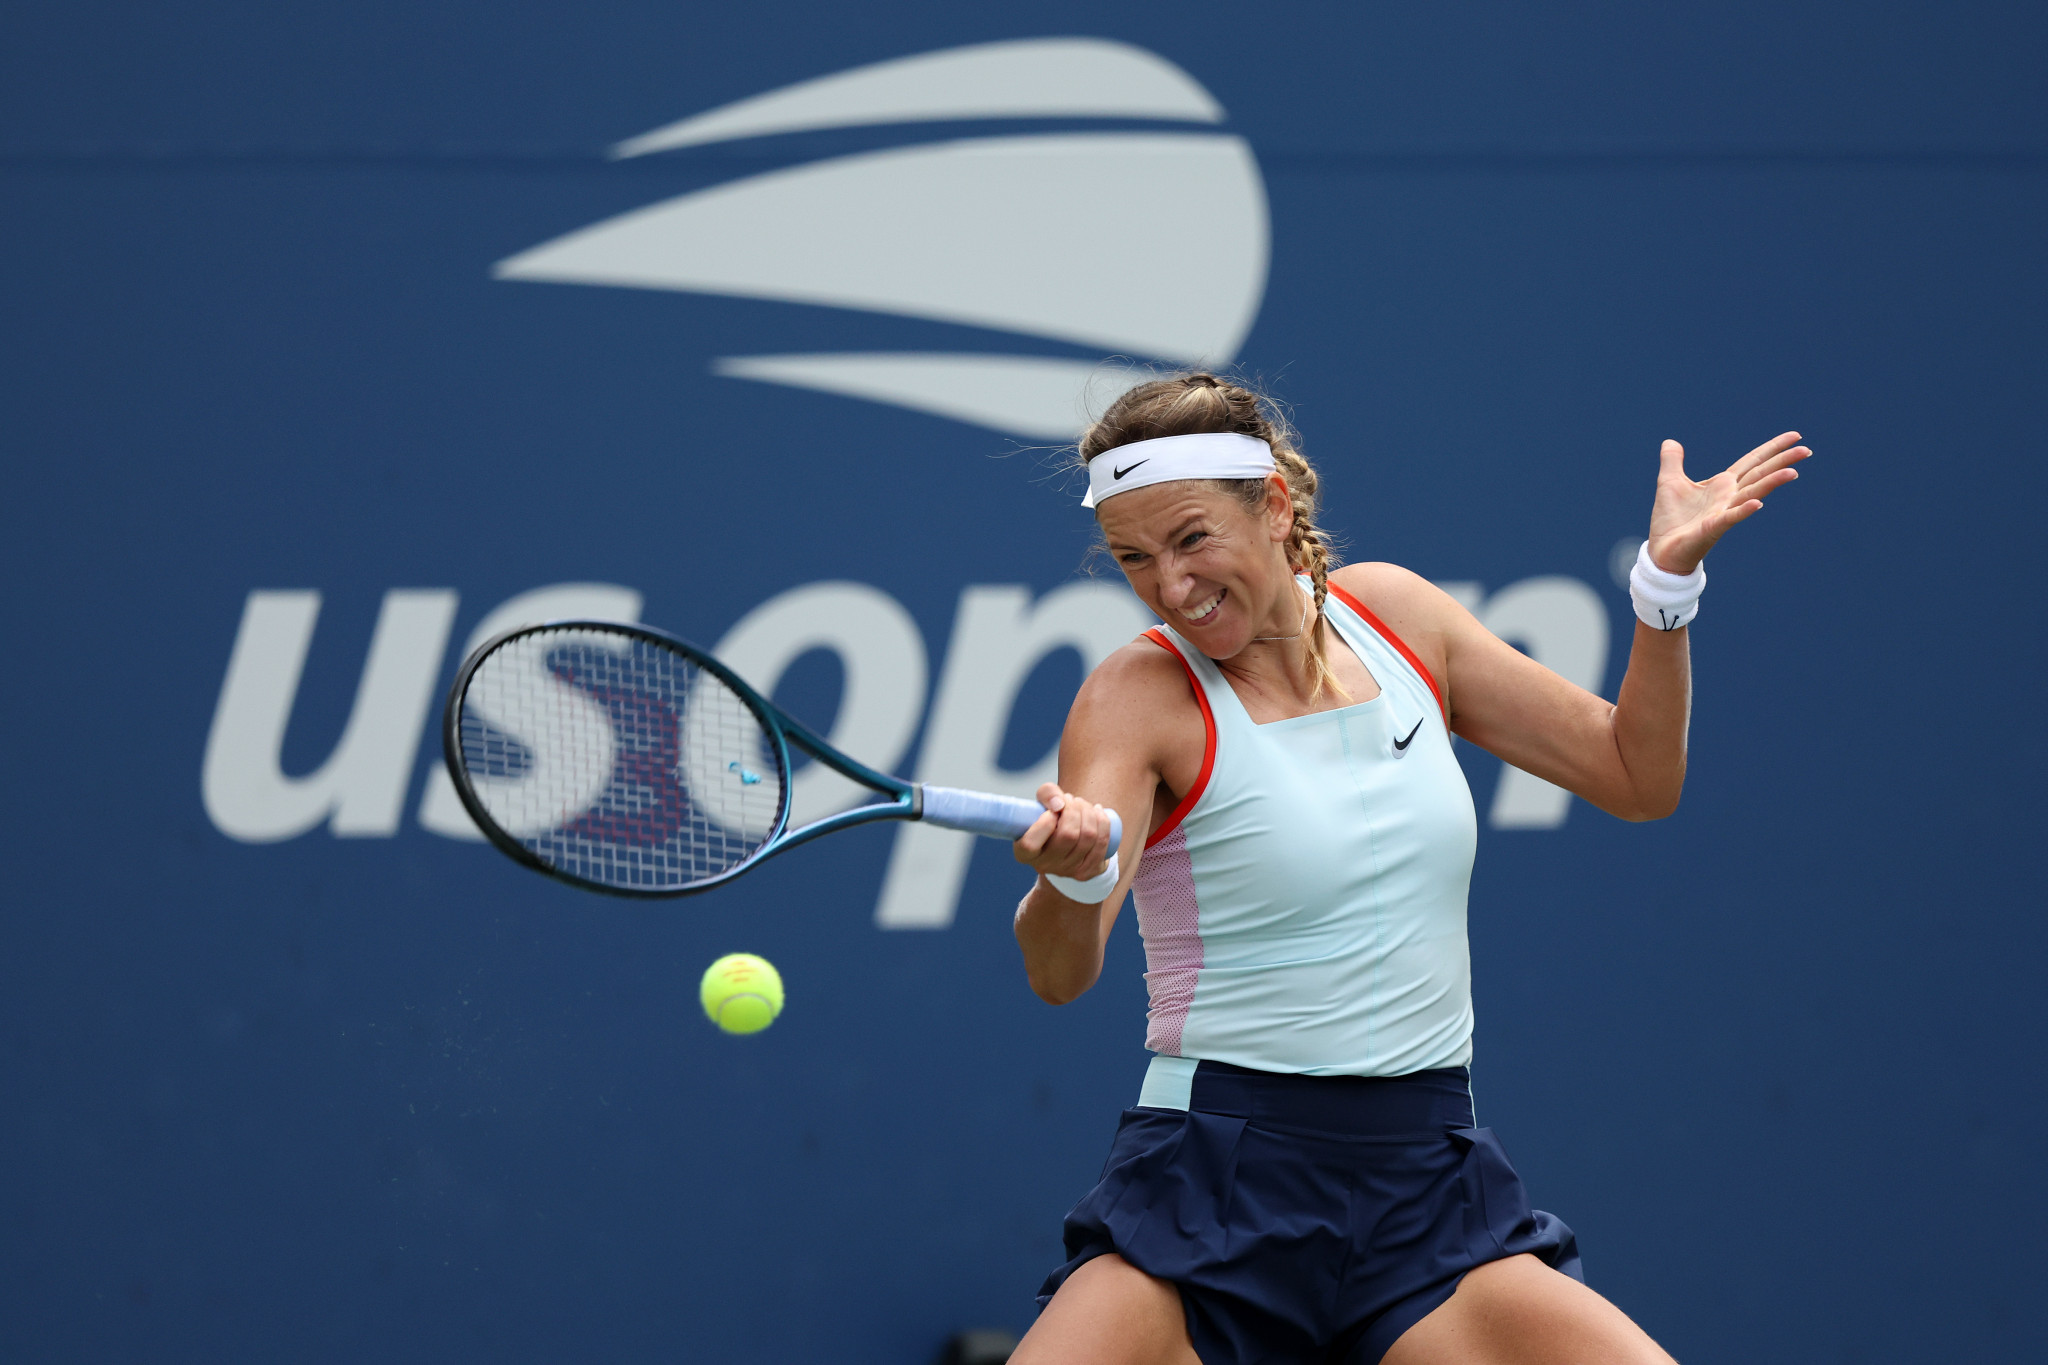 Three-time US Open finalist Victoria Azarenka of Belarus, competing as a neutral, advanced to the fourth round with a comfortable win against Croatia's Petra Martić ©Getty Images